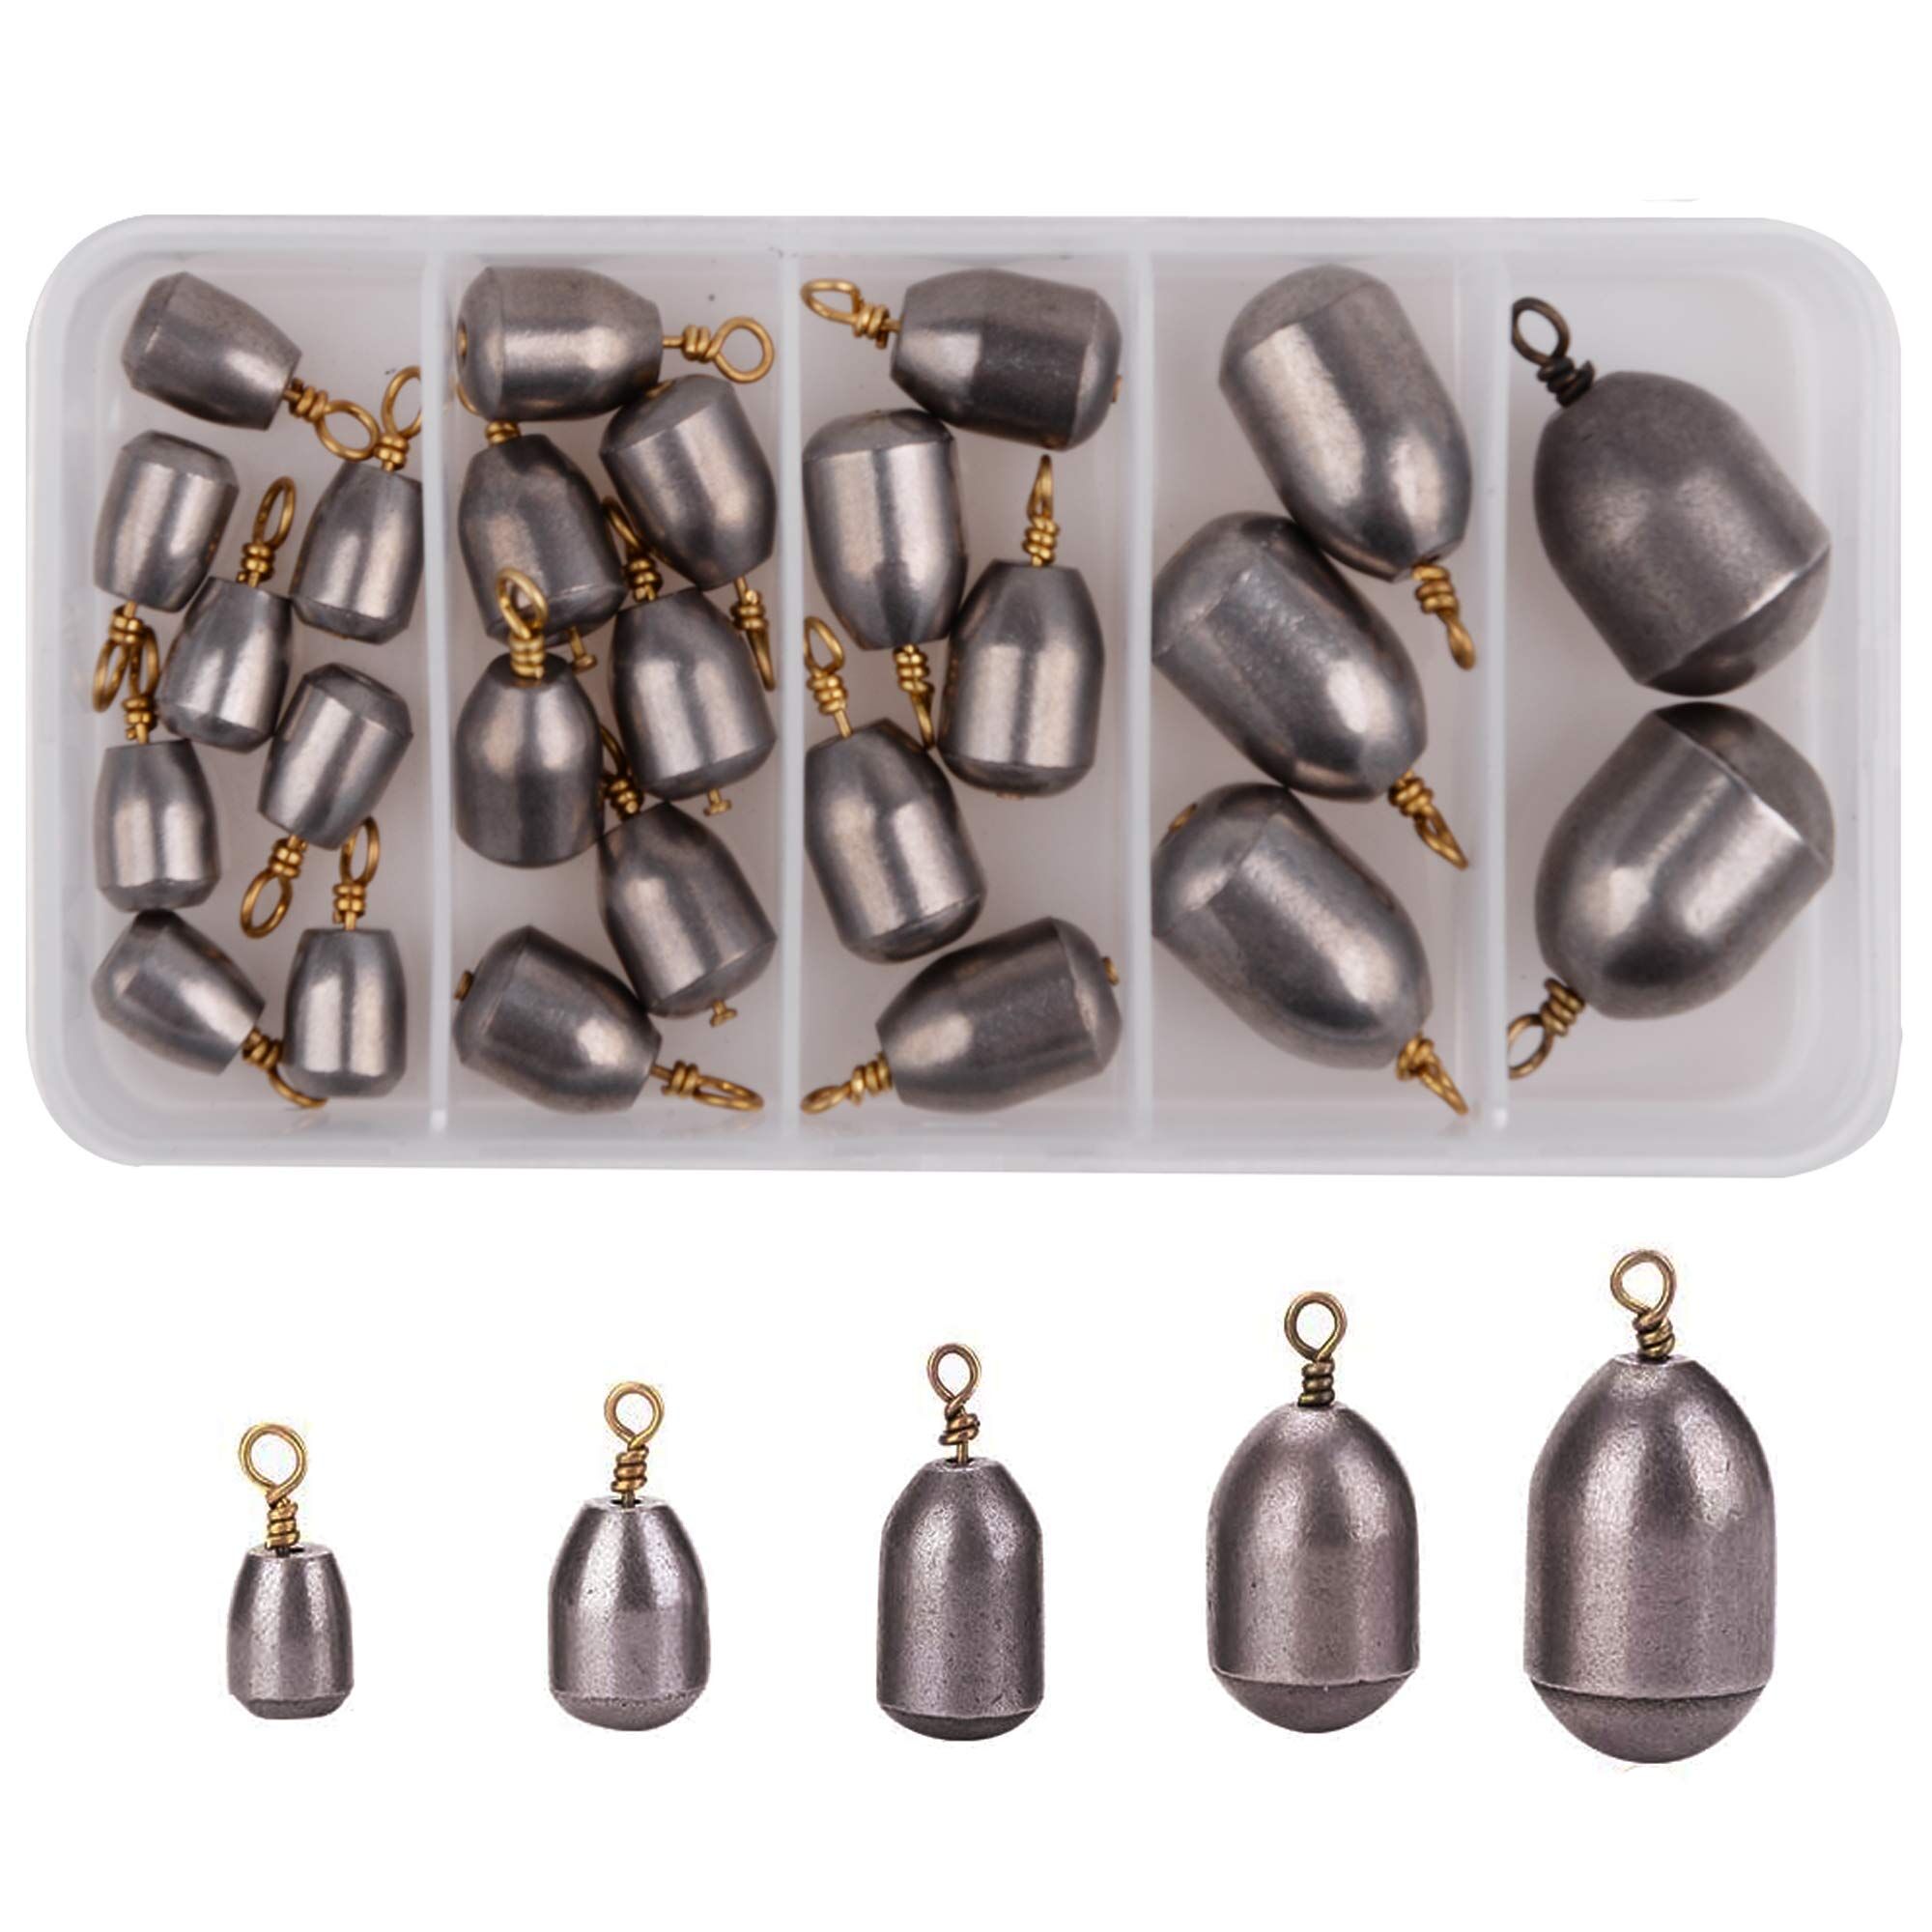 Buy China Wholesale Ring Iron Freshwater Saltwater Fishing Weights 25/54pcs  Bass Casting Bell Sinkers & Fishing Sinkers $0.04